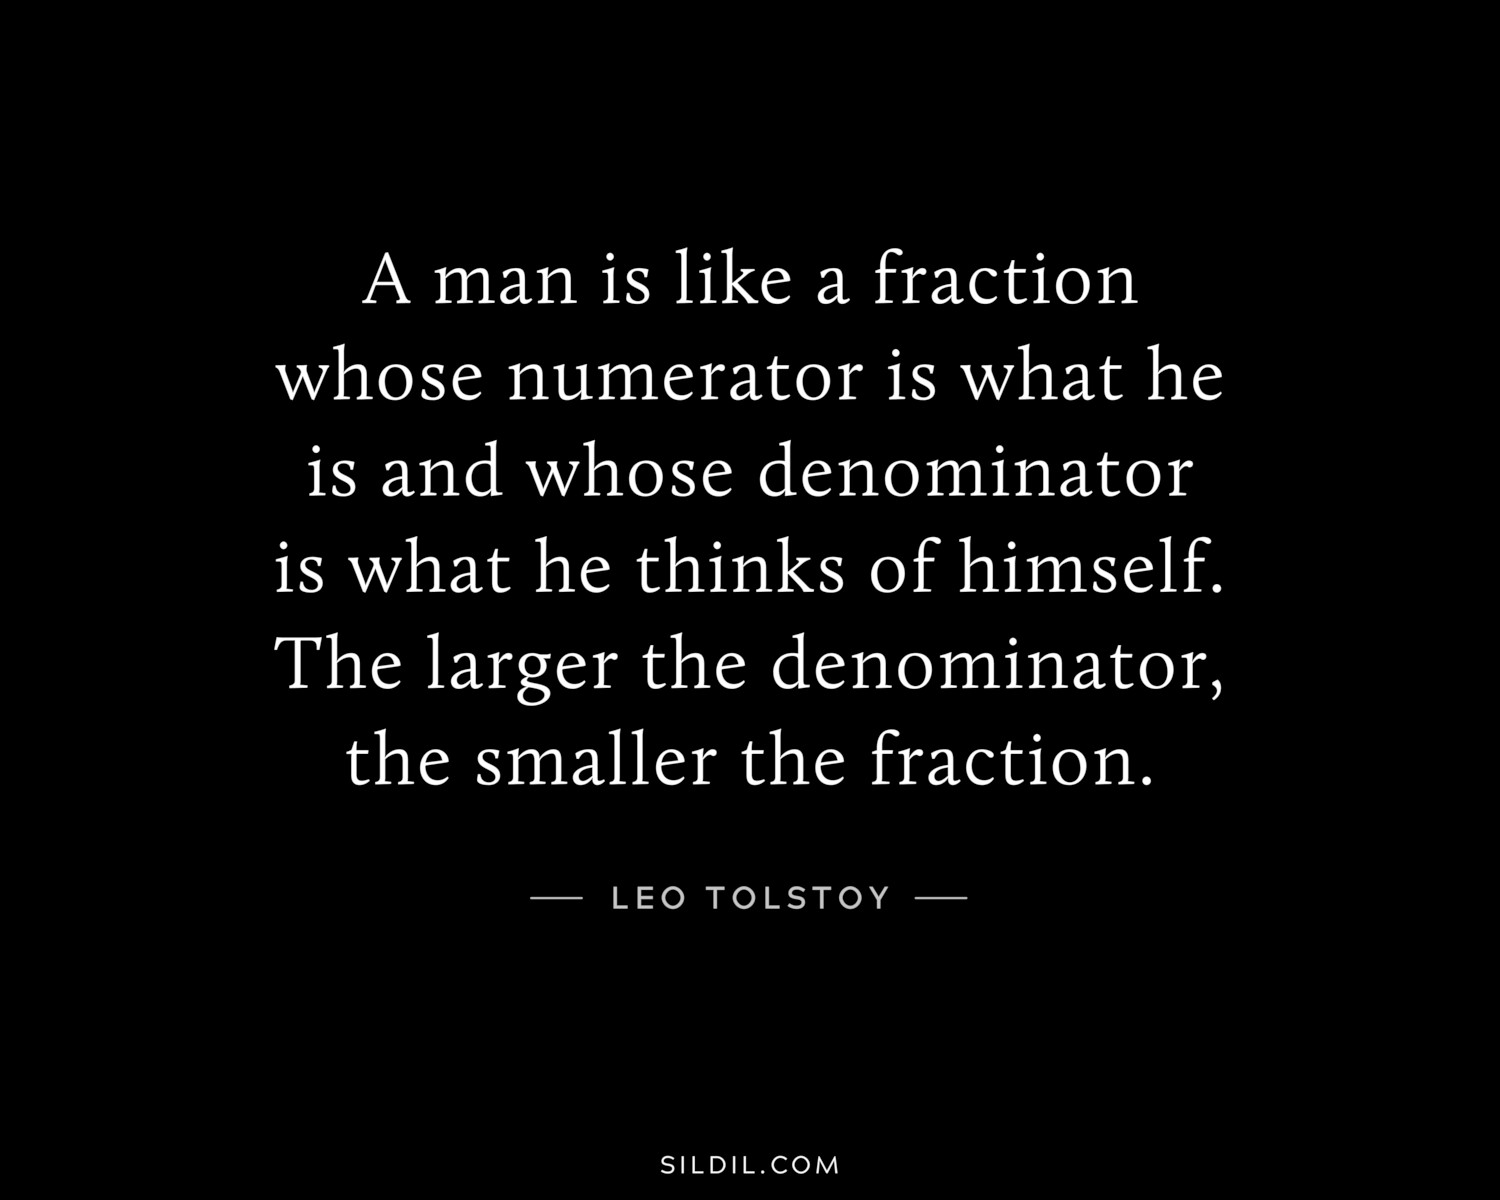 A man is like a fraction whose numerator is what he is and whose denominator is what he thinks of himself. The larger the denominator, the smaller the fraction.